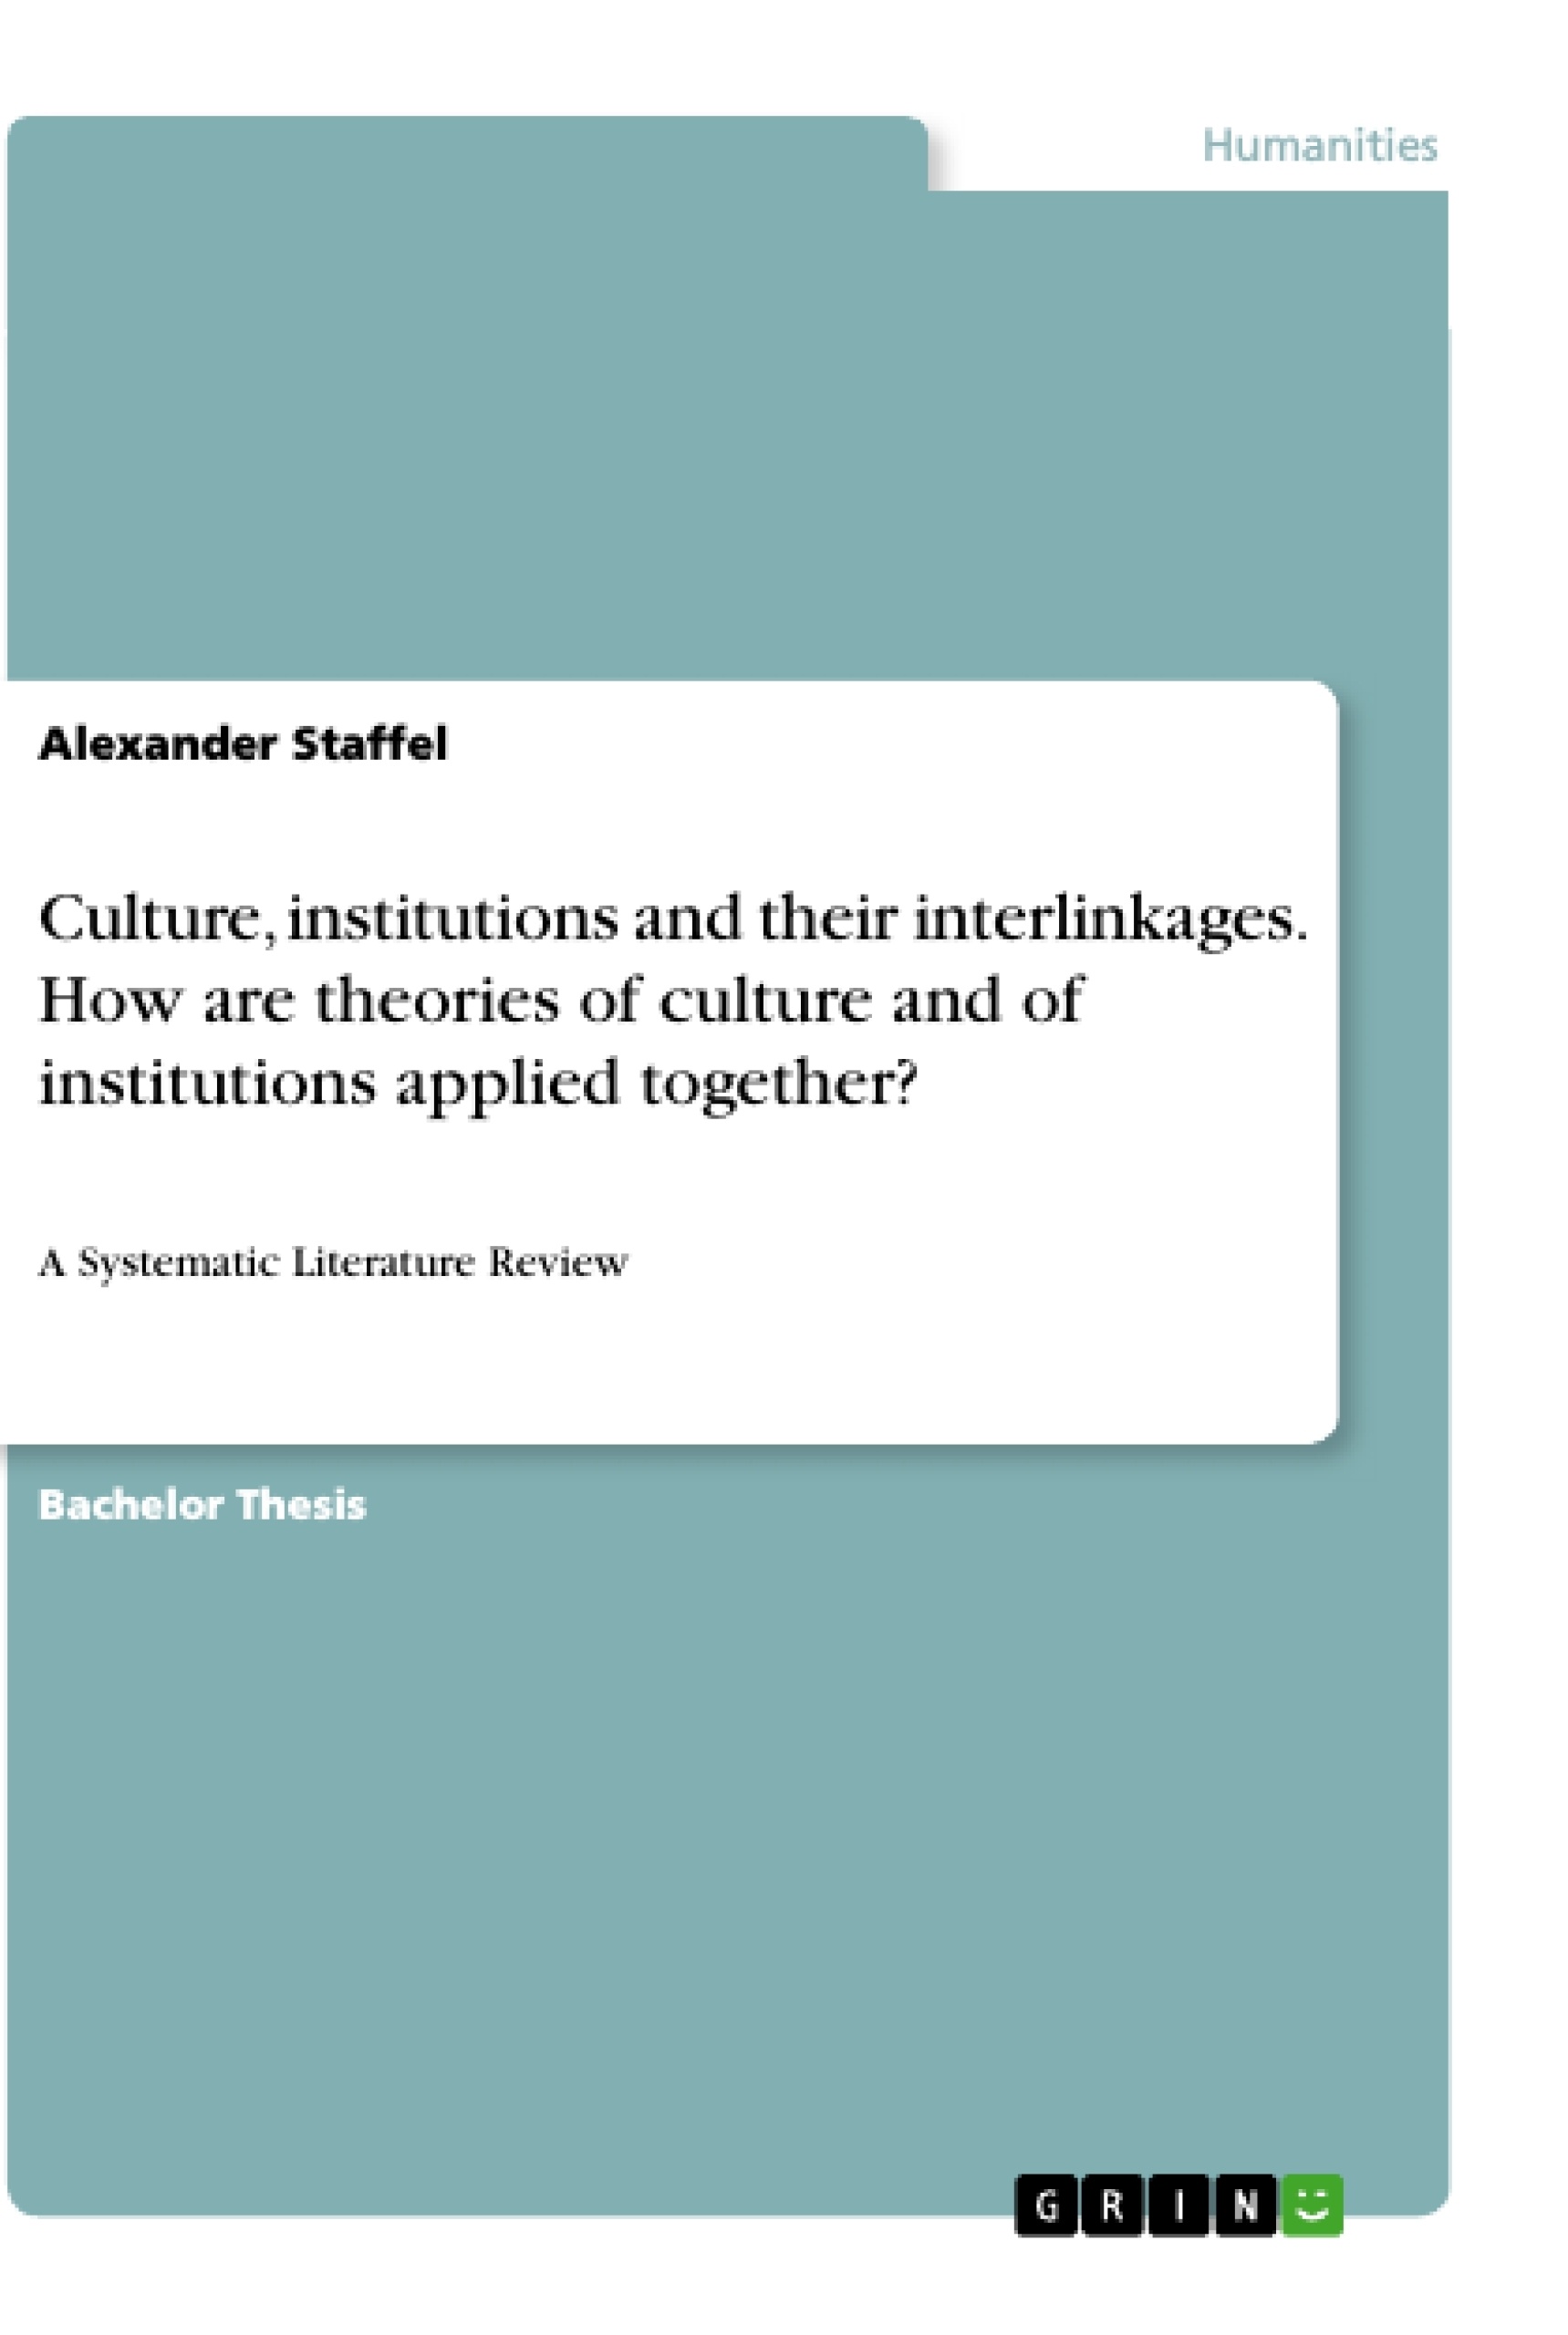 Title: Culture, institutions and their interlinkages. How are theories of culture and of institutions applied together?